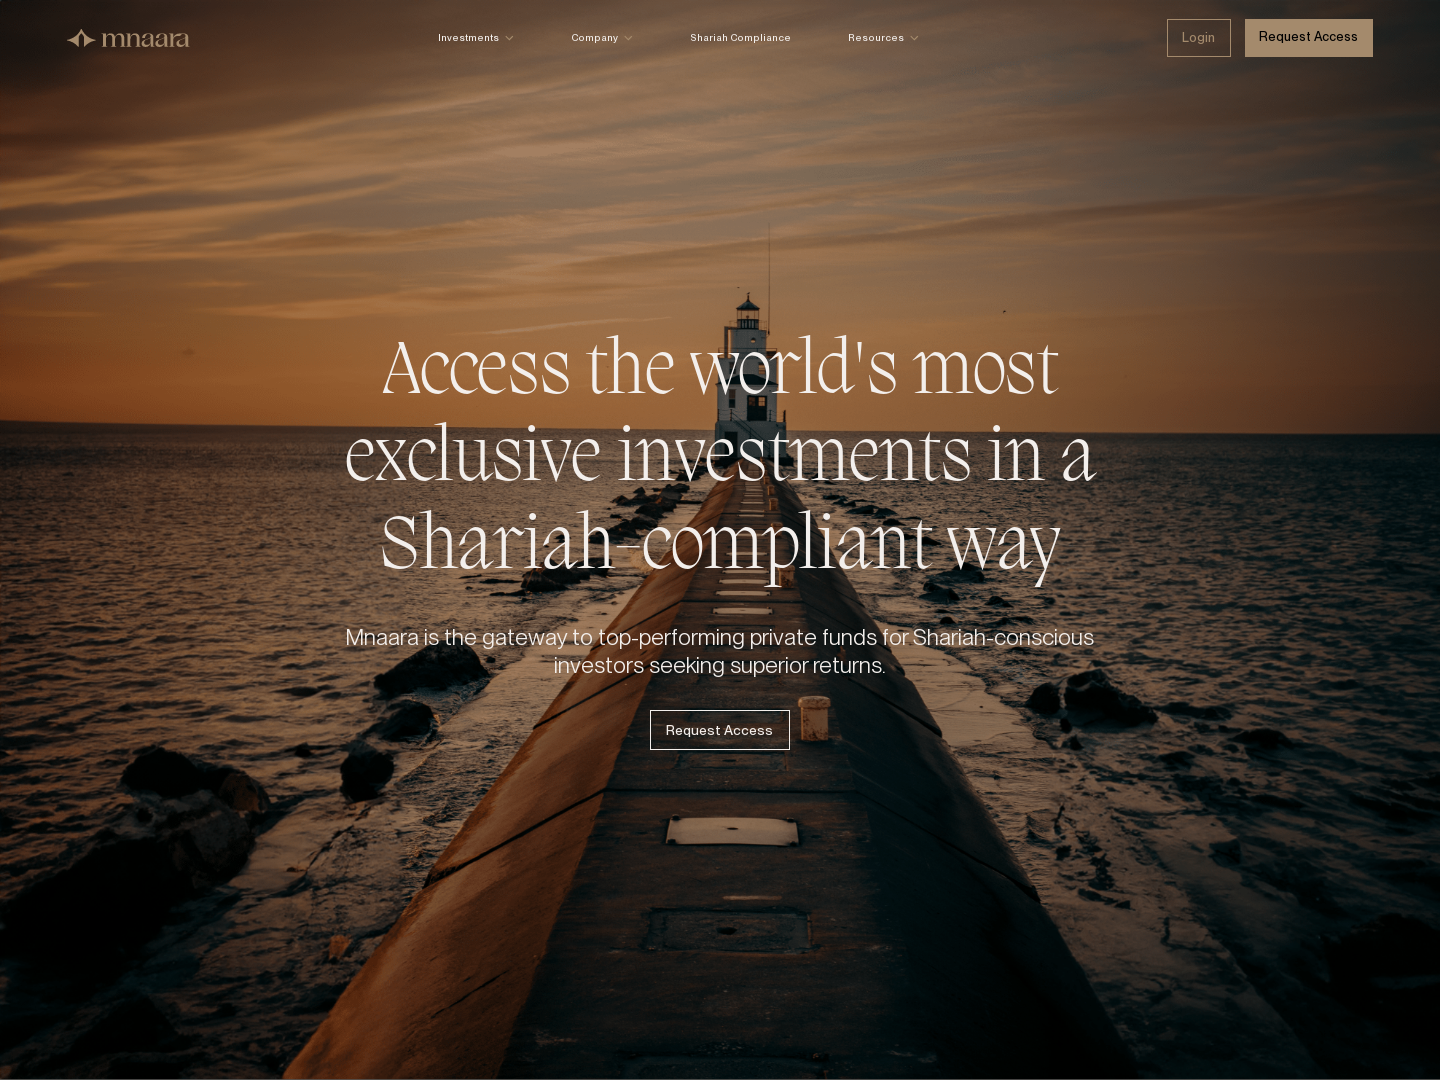 Mnaara successfully completes pre-seed funding for Shariah-compliant investment platform.